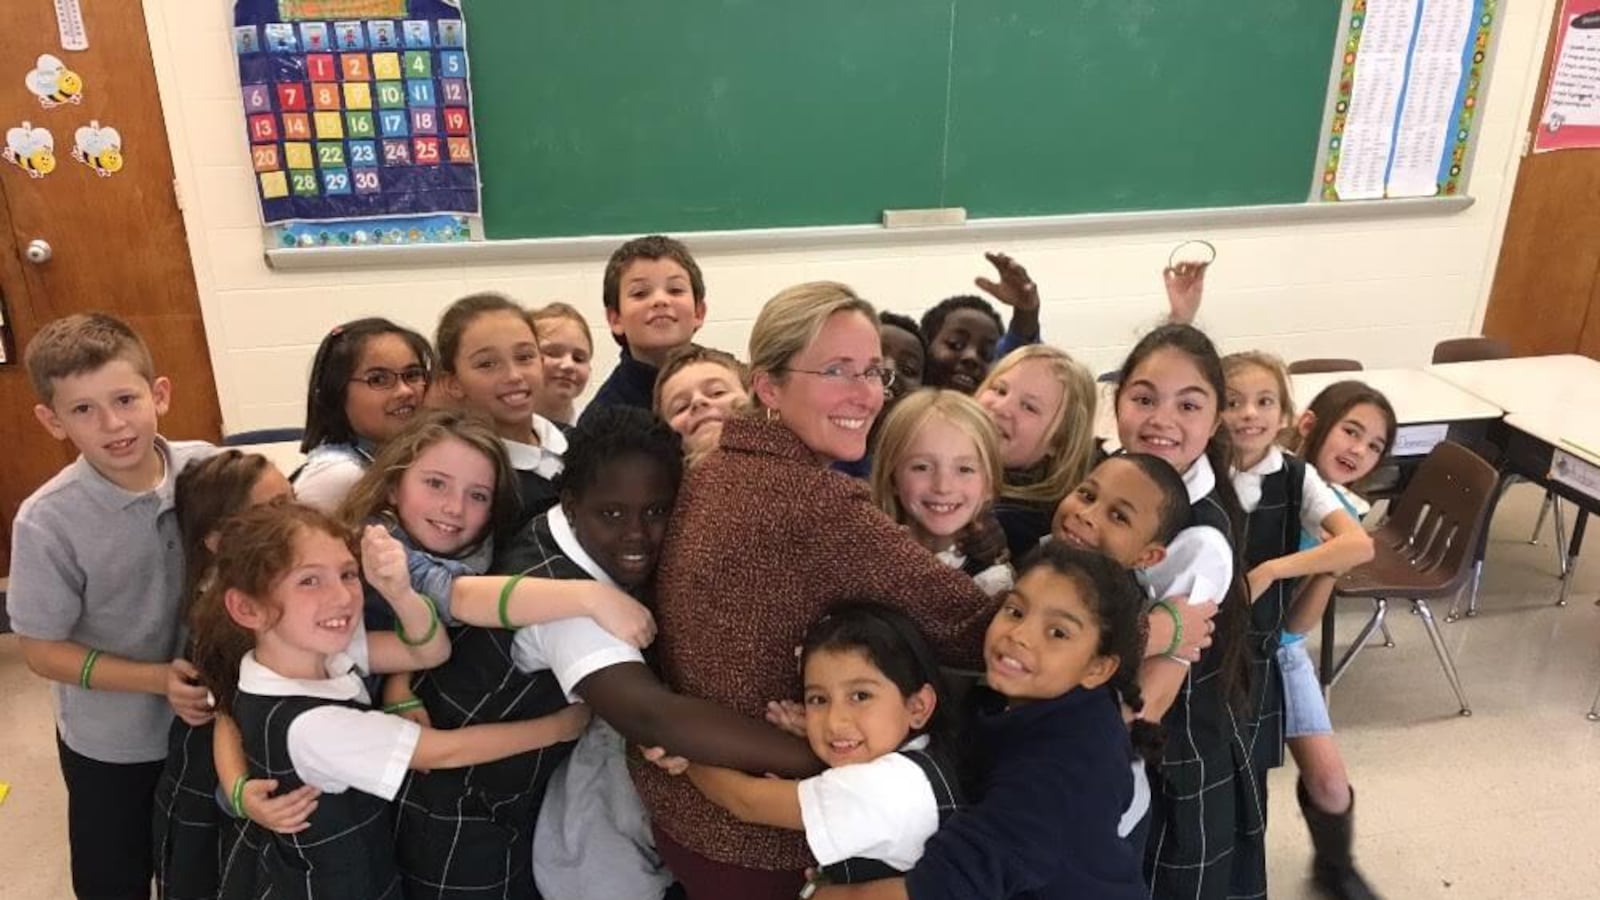 Twenty elementary school students surround Sandy Hook mom Scarlett Lewis and hug her in front of a chalkboard in a classroom. 